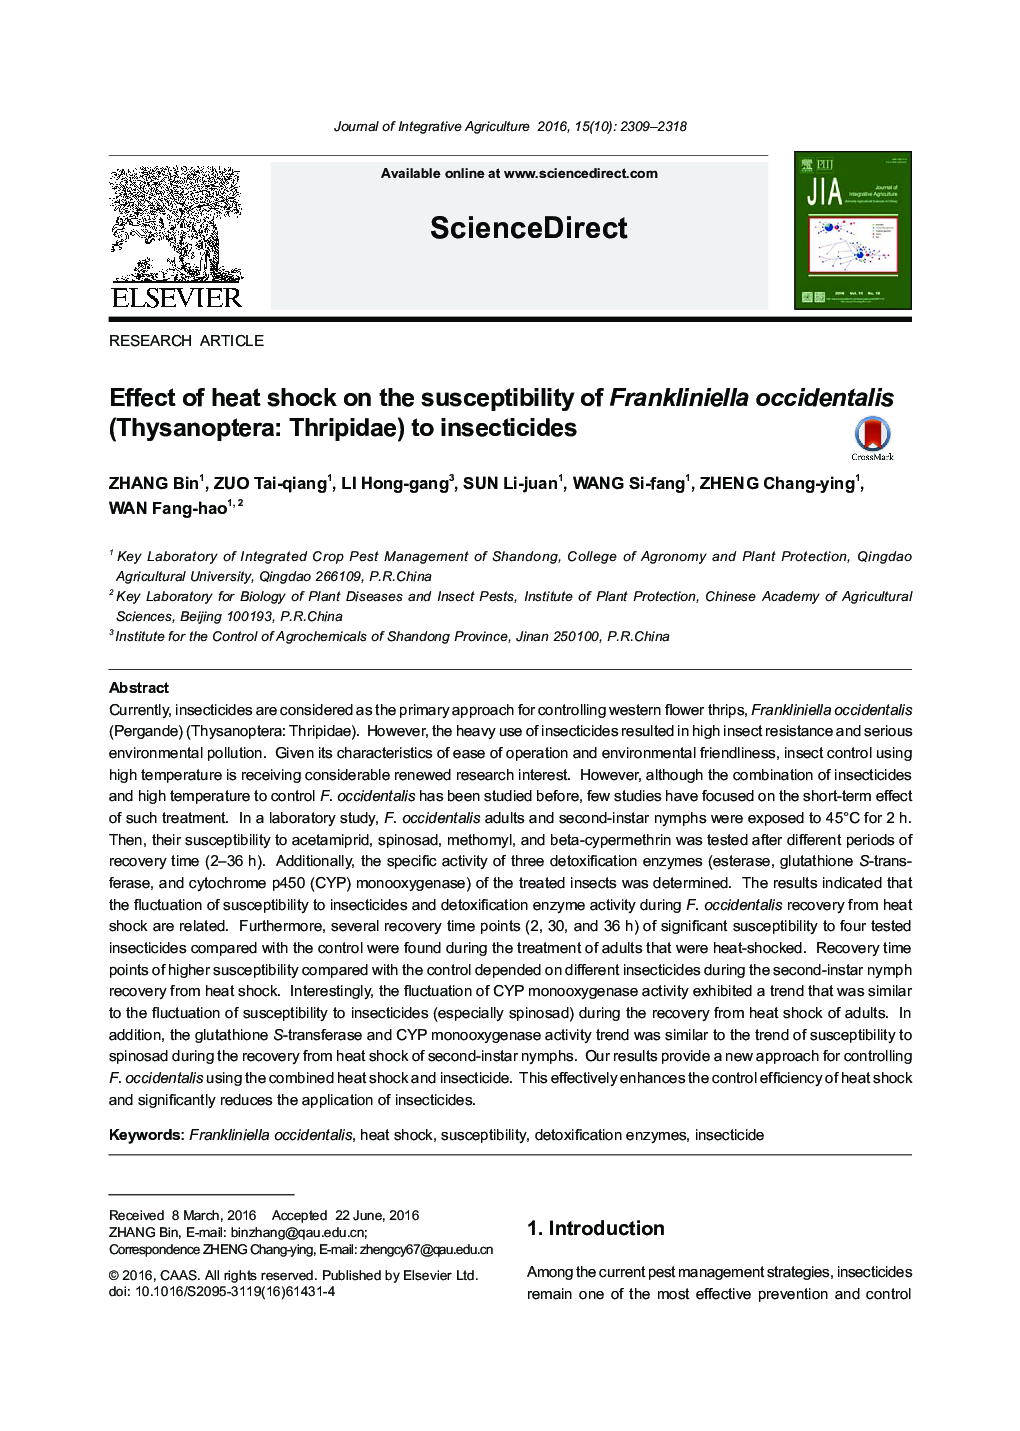 Effect of heat shock on the susceptibility of Frankliniella occidentalis (Thysanoptera: Thripidae) to insecticides